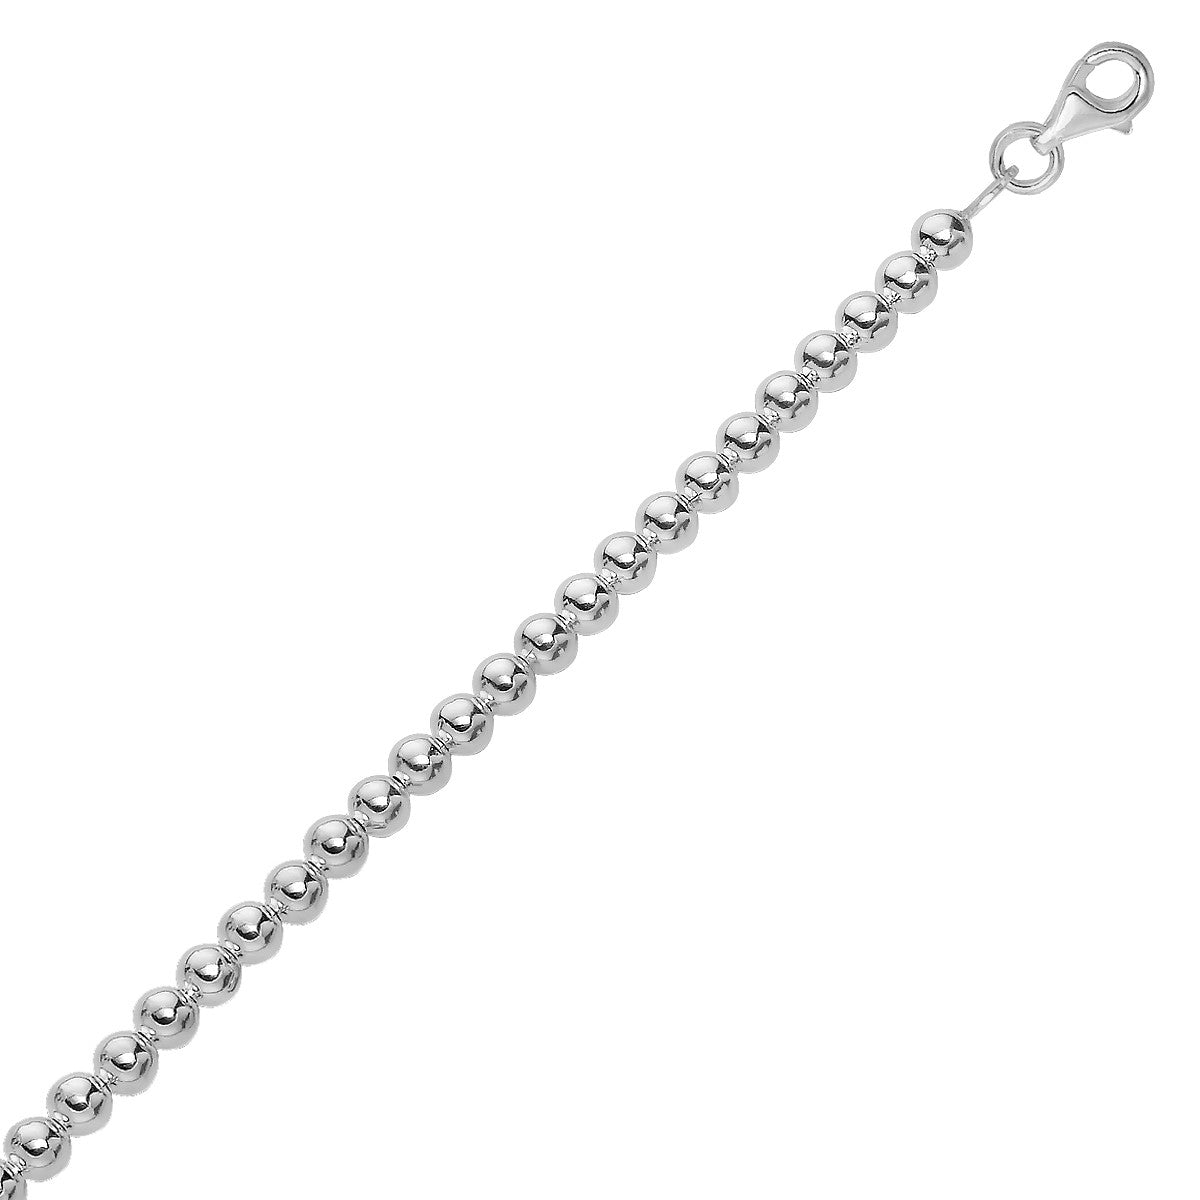 Sterling Silver Rhodium Plated Bracelet with a Polished Bead Motif (8mm)